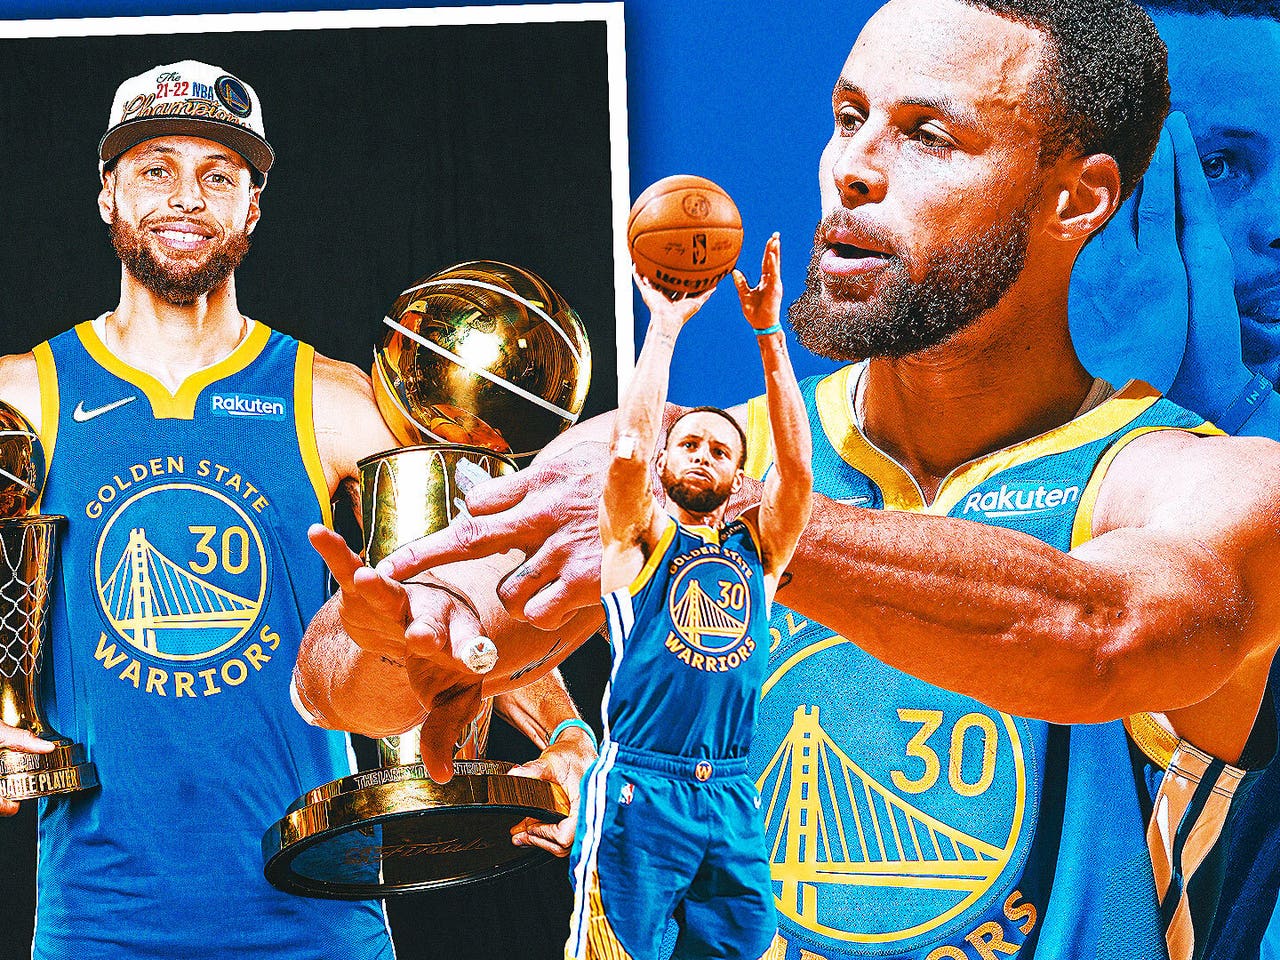 With 4th NBA title, is Curry a top-10 player all time?